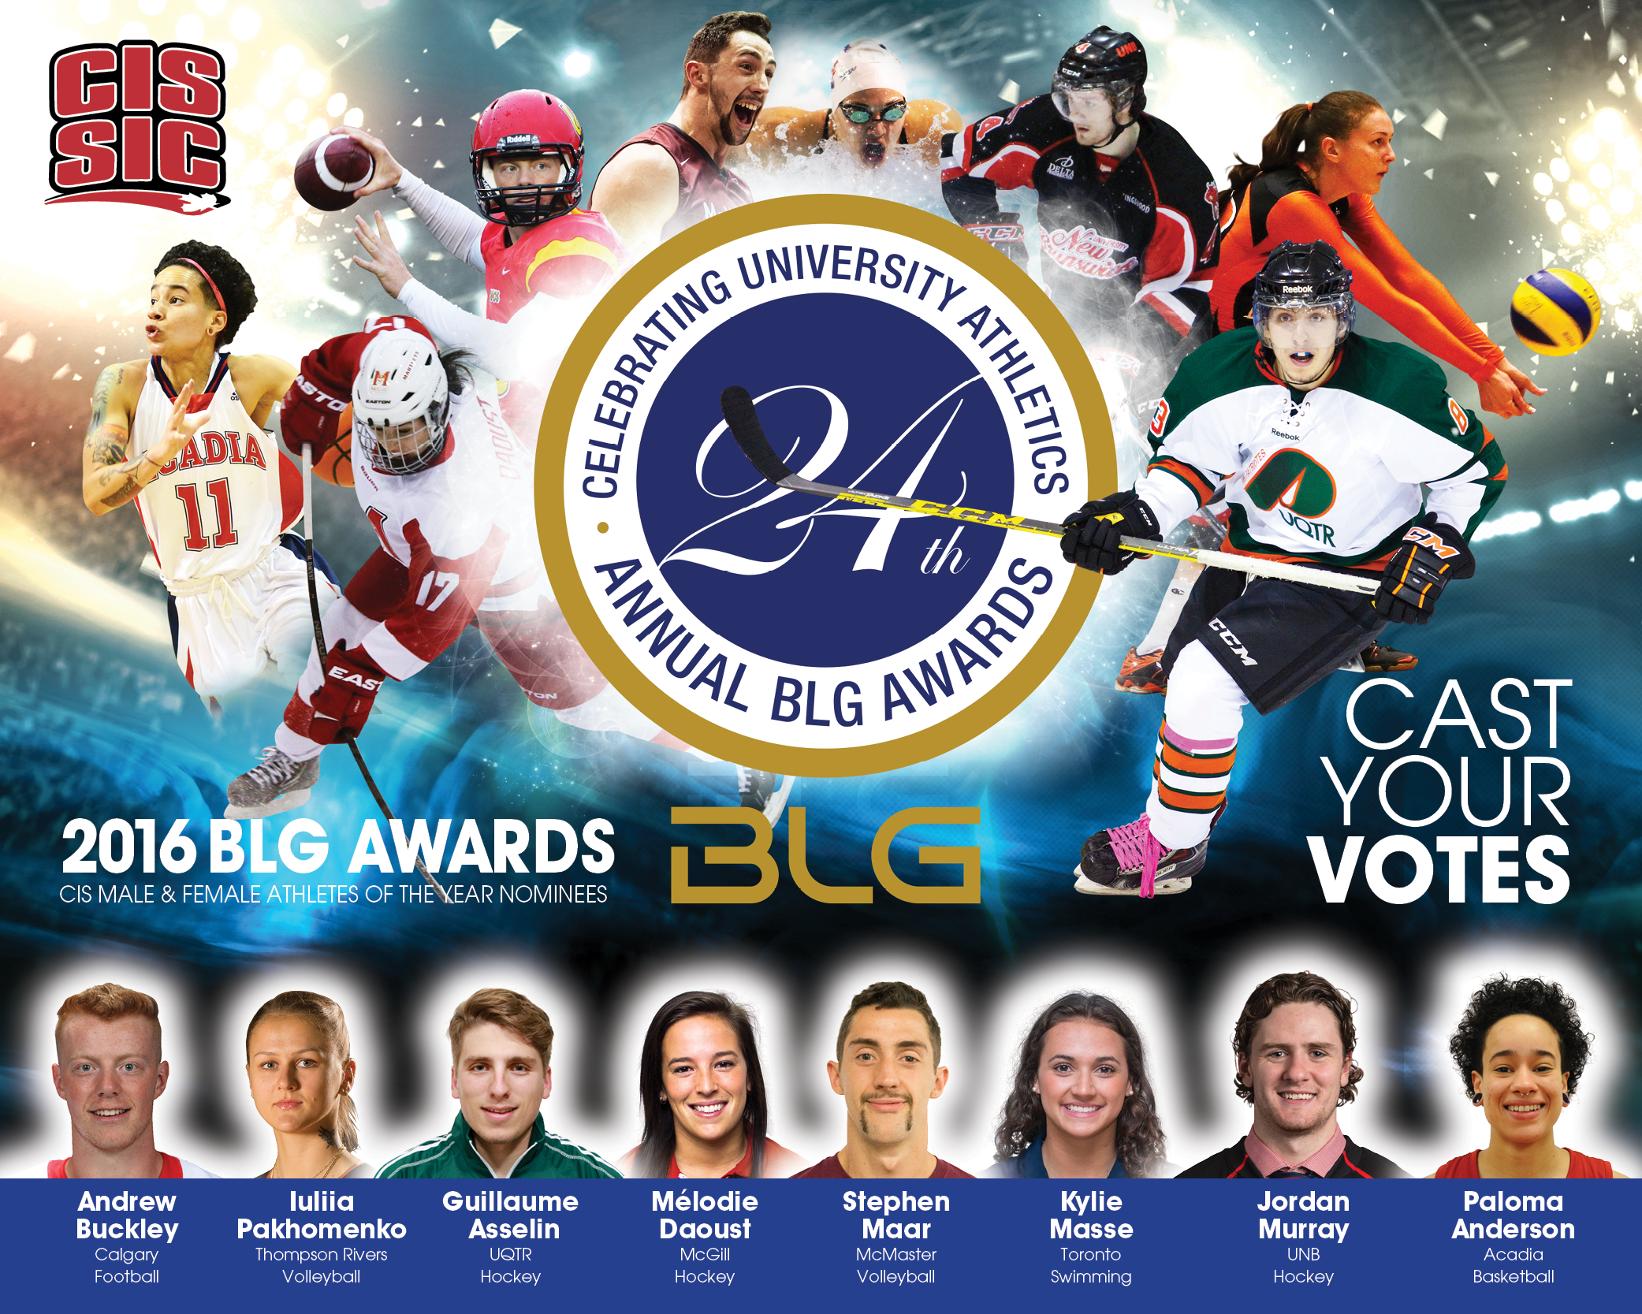 24th BLG Awards CIS athlete of the year nominees announced